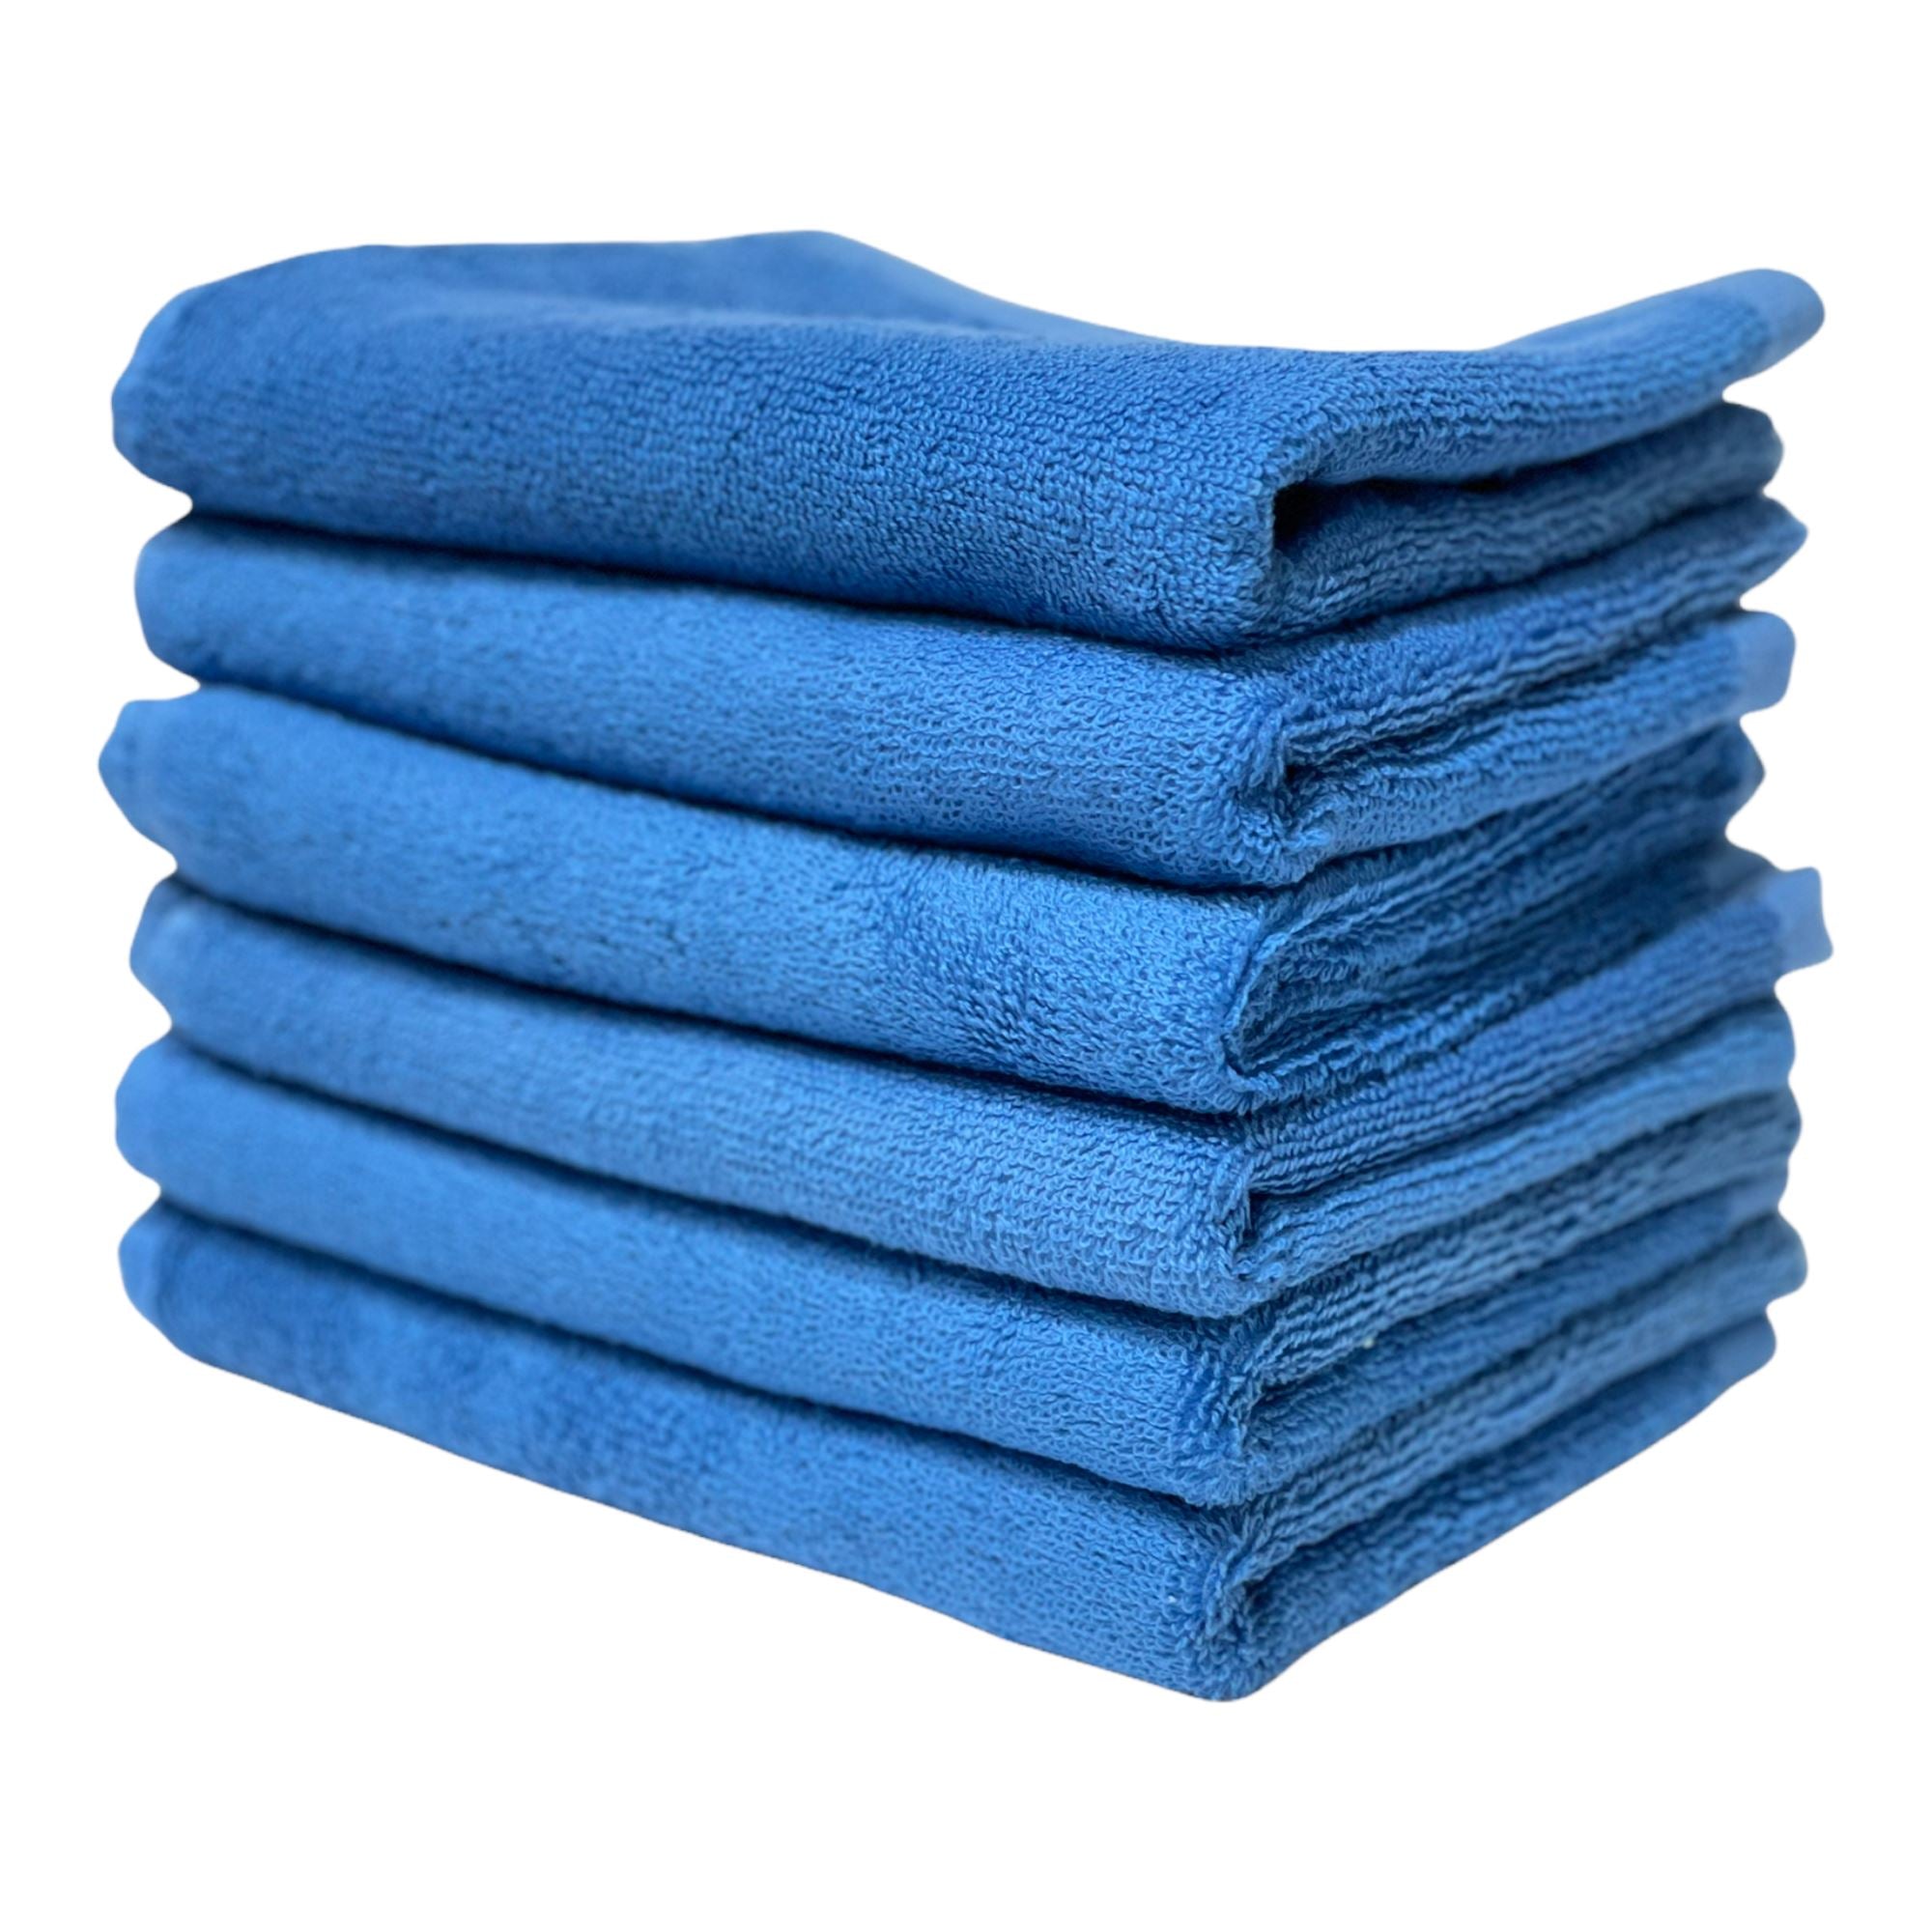 https://cdn.shopify.com/s/files/1/0561/1693/6911/products/car-wash-100-cotton-terry-cloth-cleaning-drying-towels-16-x-25-cotton-towel-golden-state-trading-inc-12-pieces-blue-147919.jpg?v=1668741022